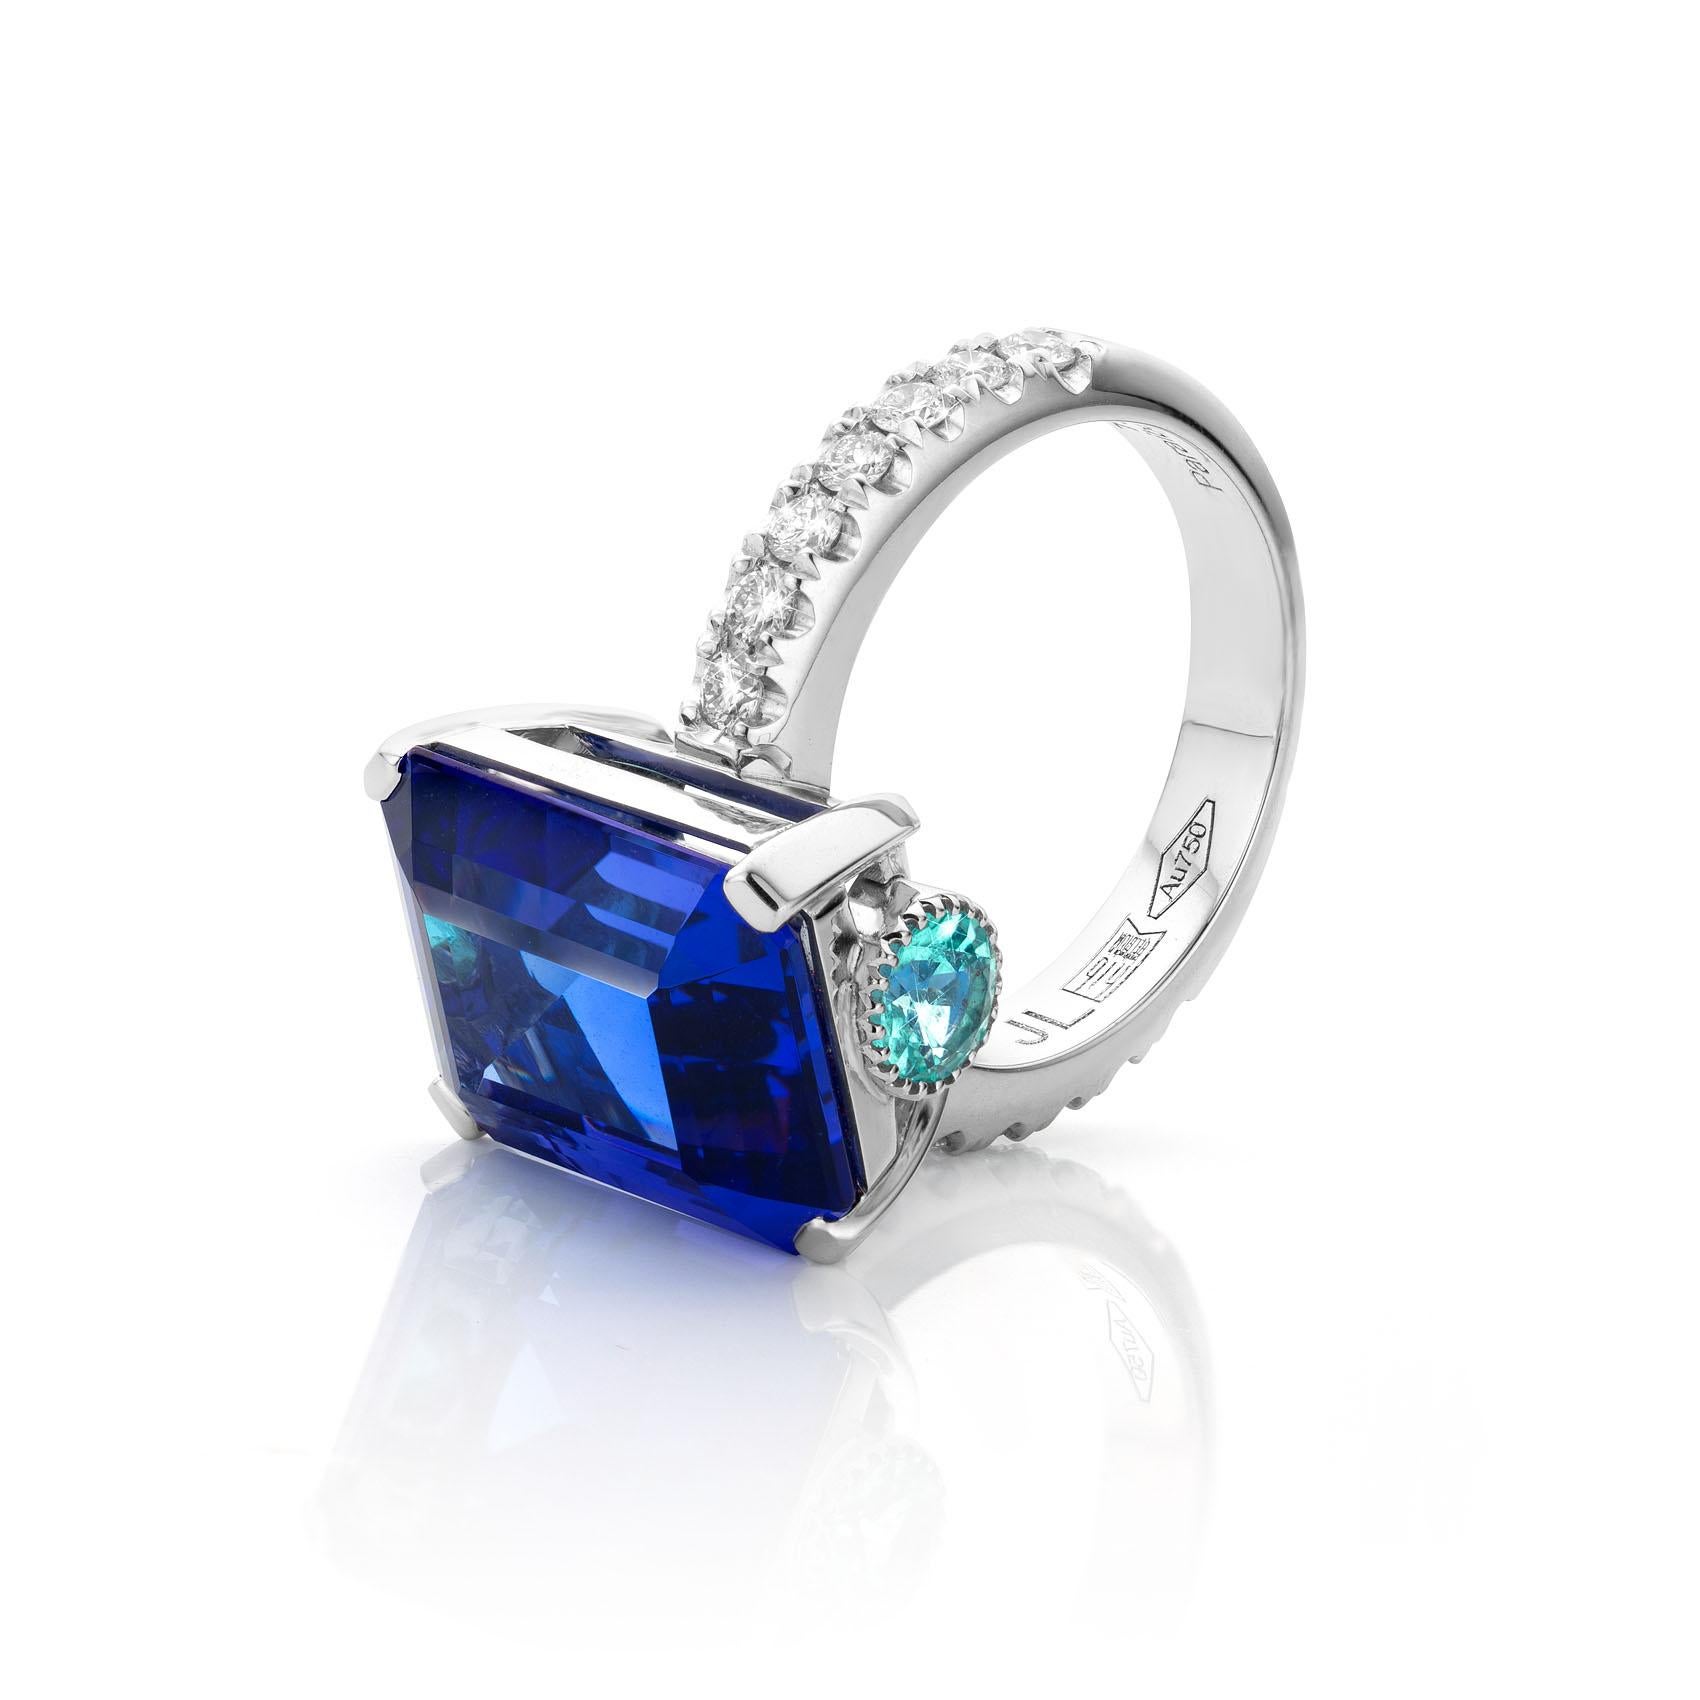 Contemporary 18 Karat White Gold 12.4 Carat Tanzanite Cocktail Ring by Jochen Leën For Sale